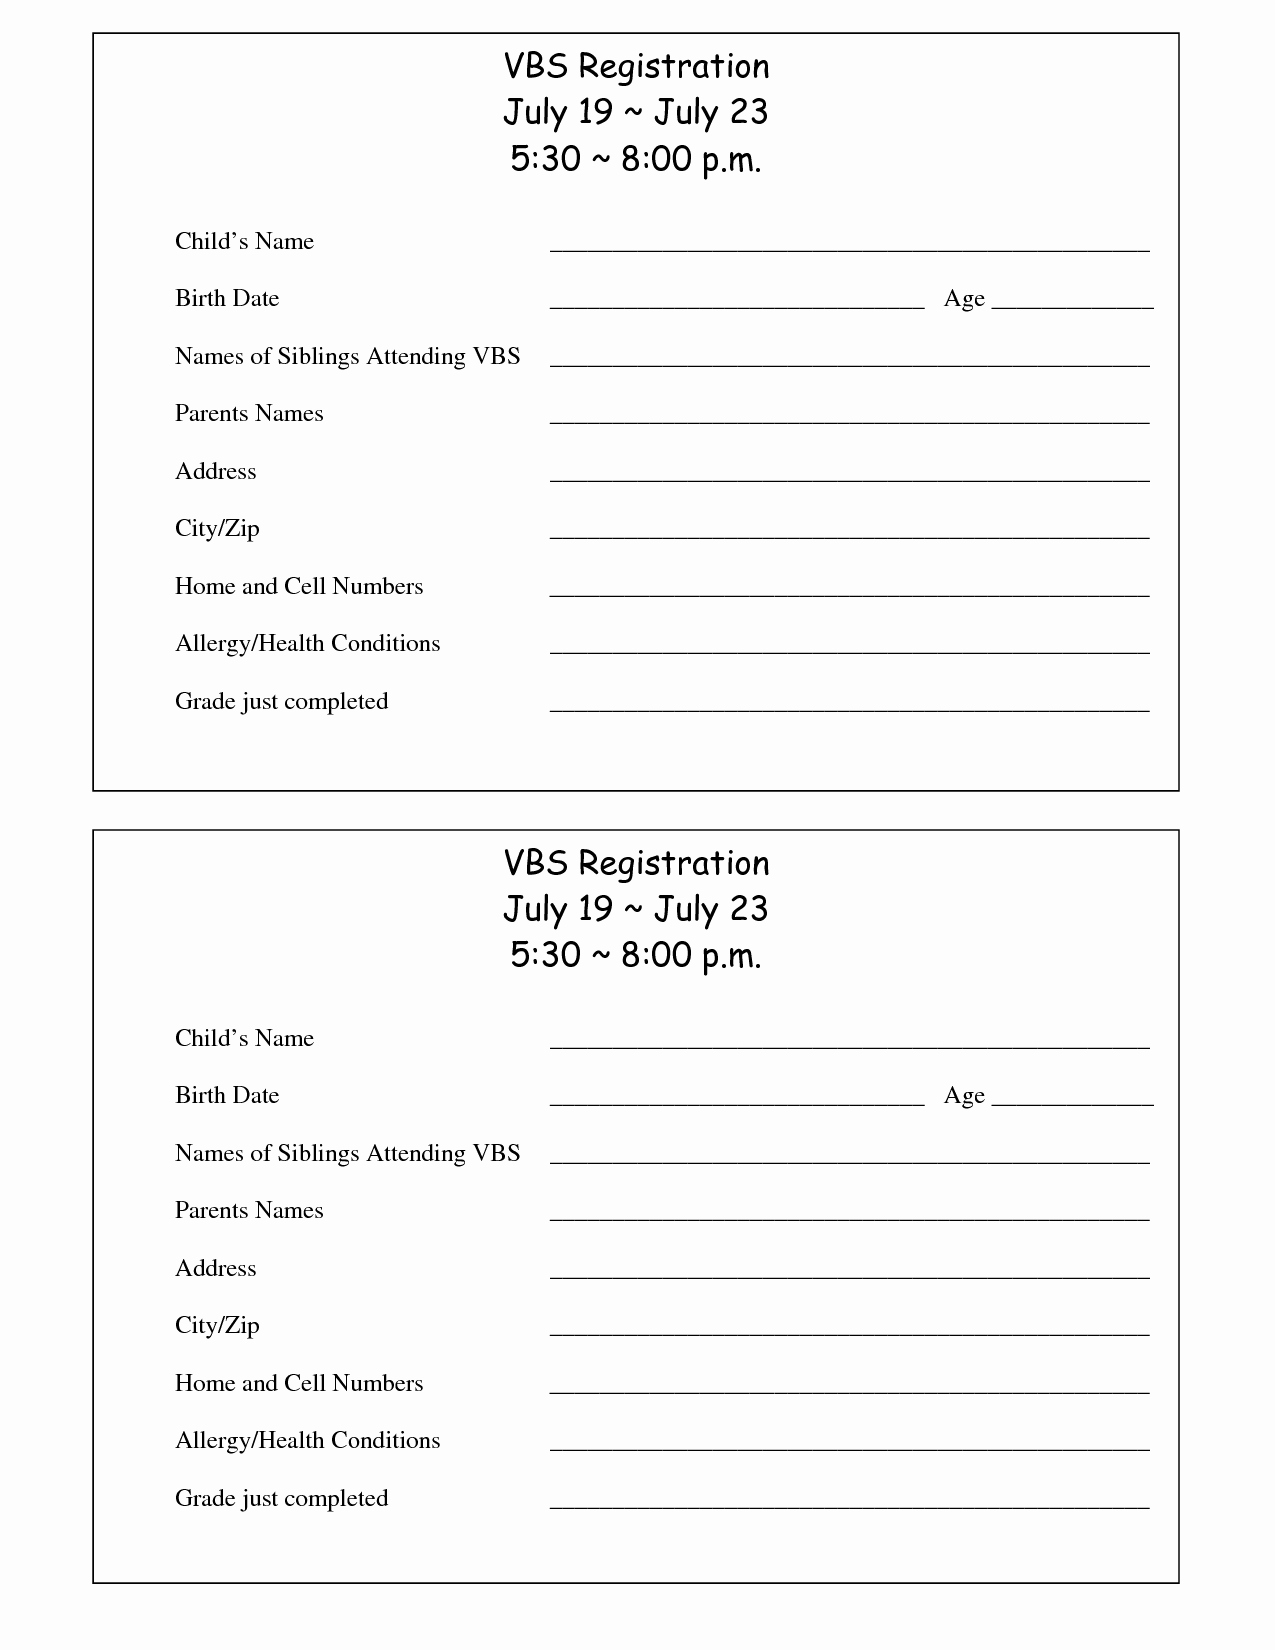 Printable Registration form Template Awesome Printable Vbs Registration form Template